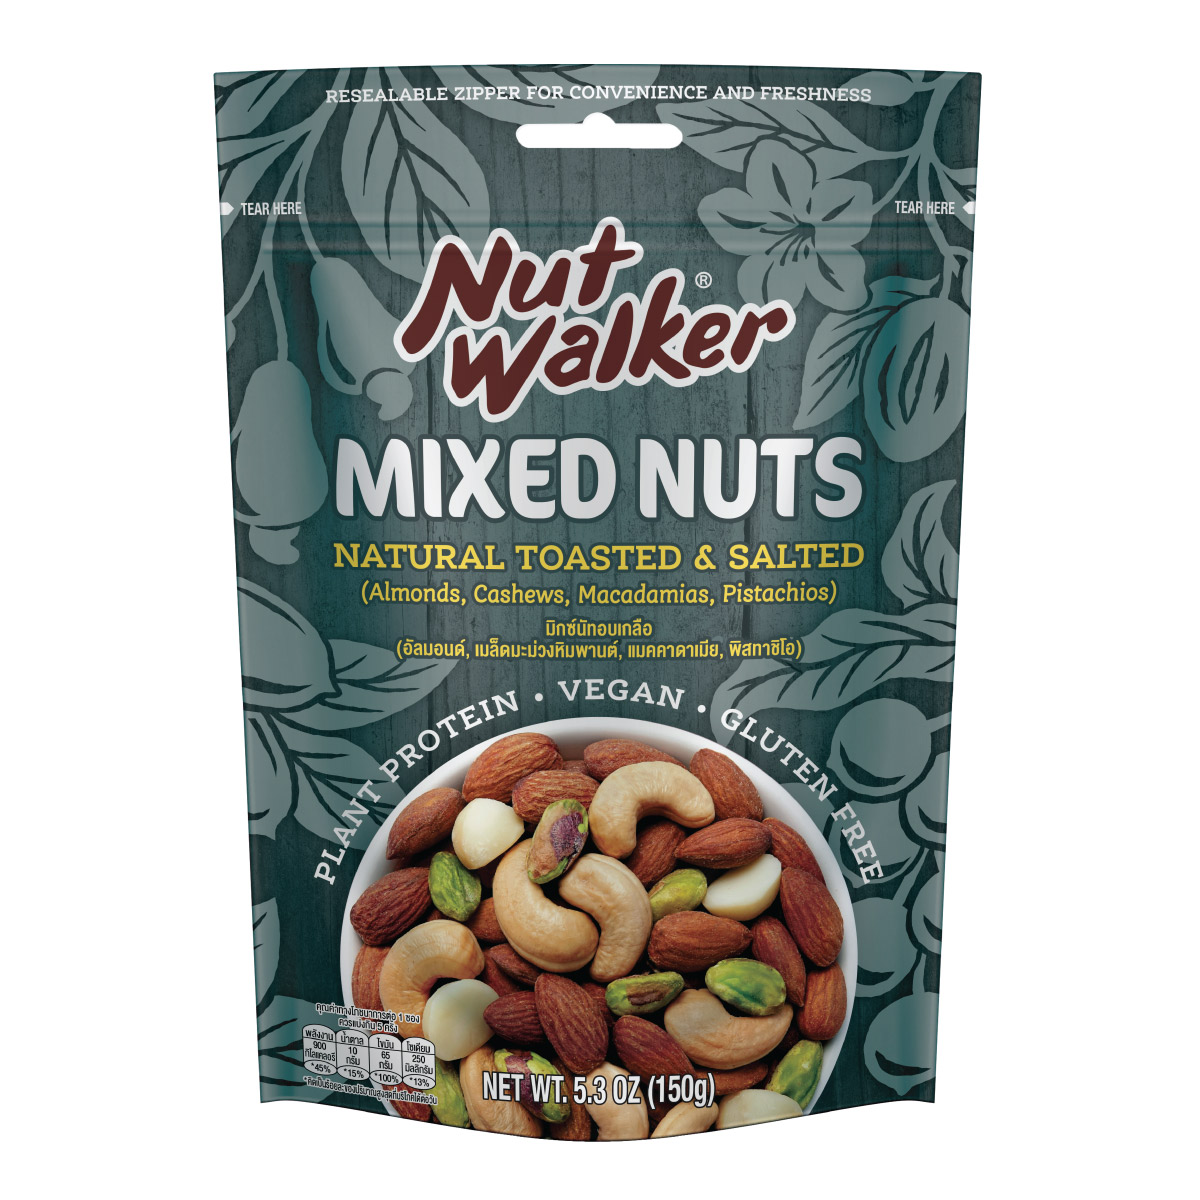 Natural-Toasted-&-Salted-Mixed-Nuts-150g